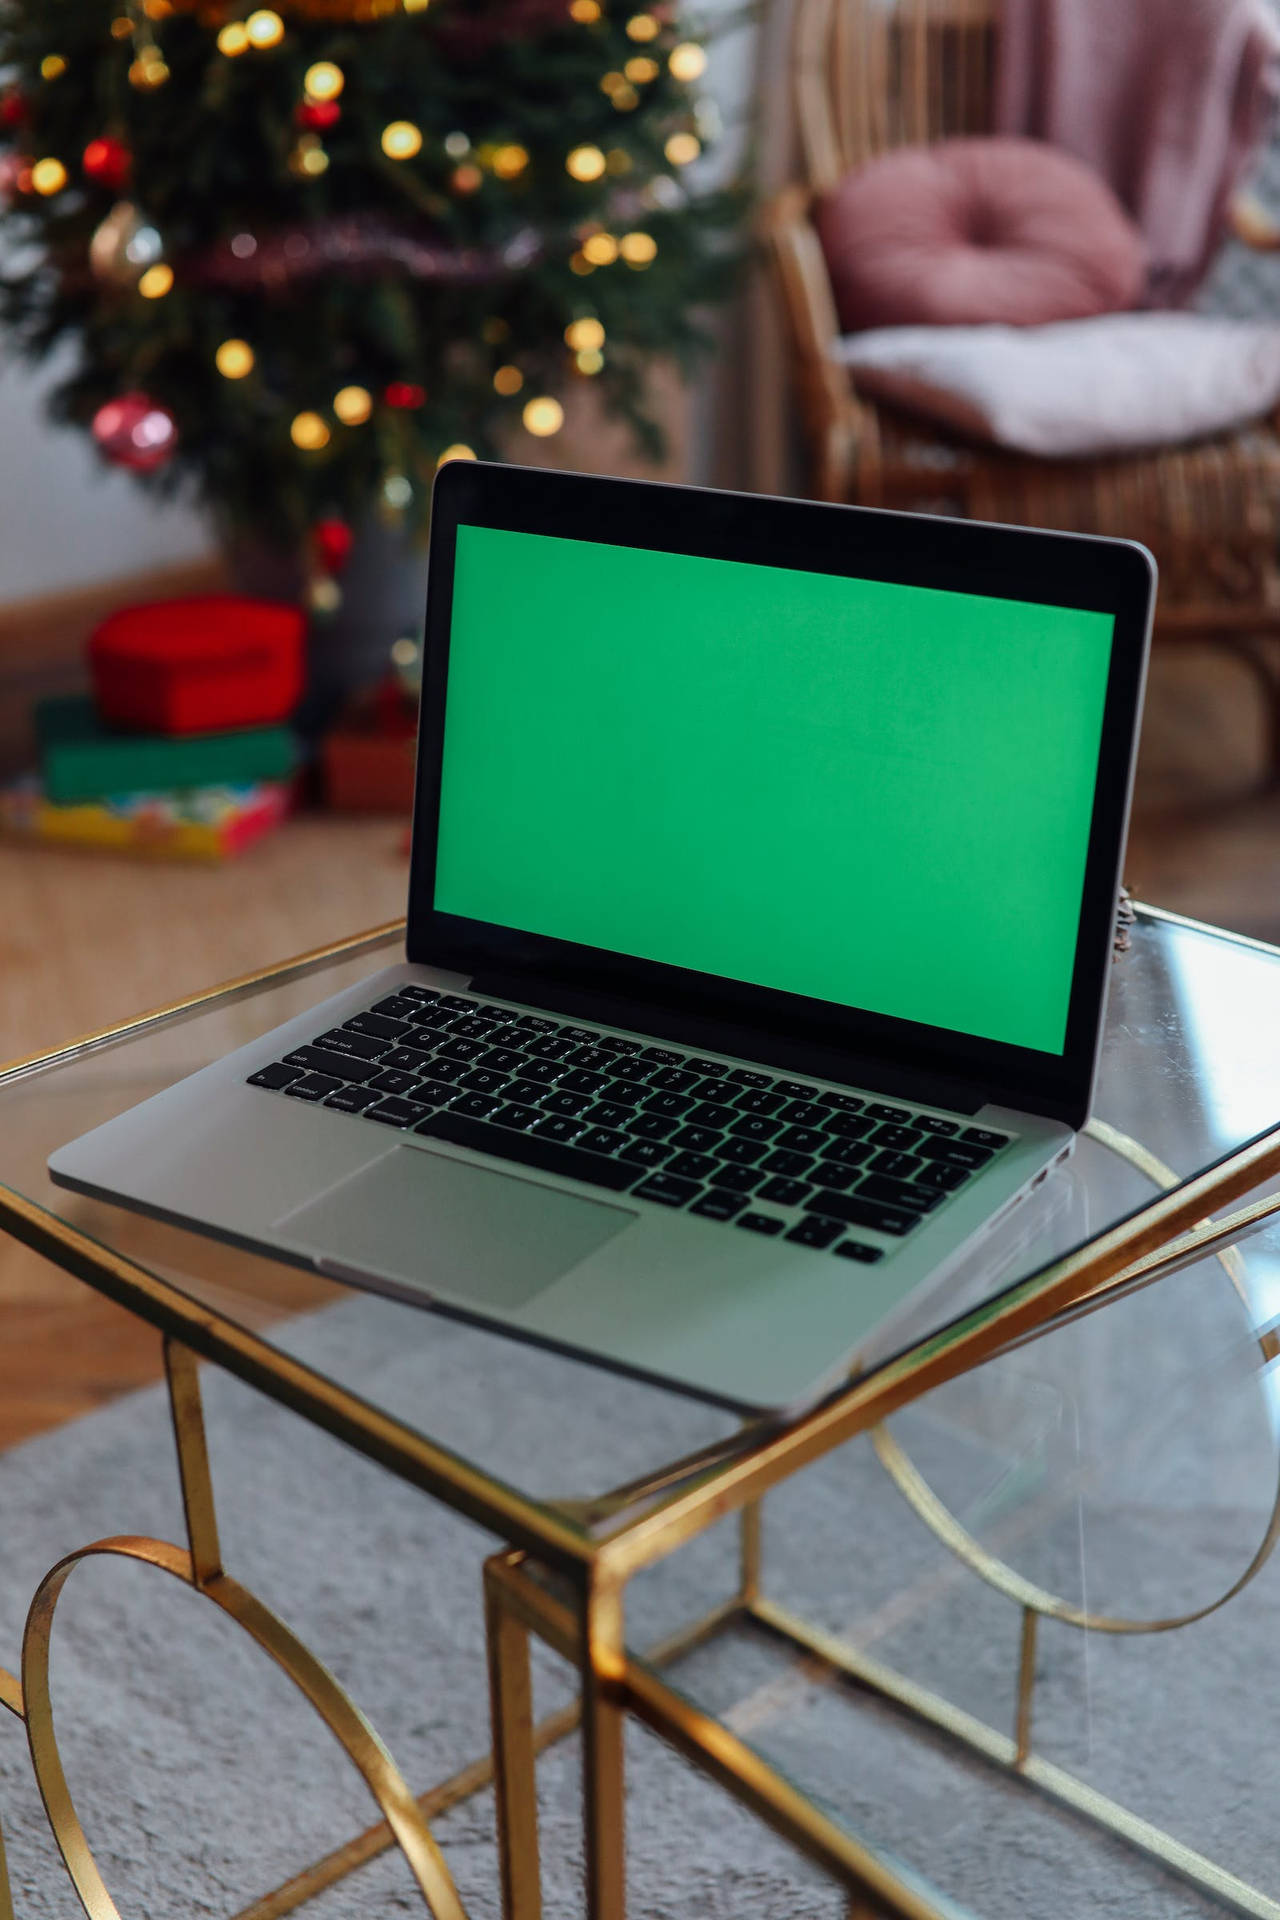 Green Screen Laptop On A Table